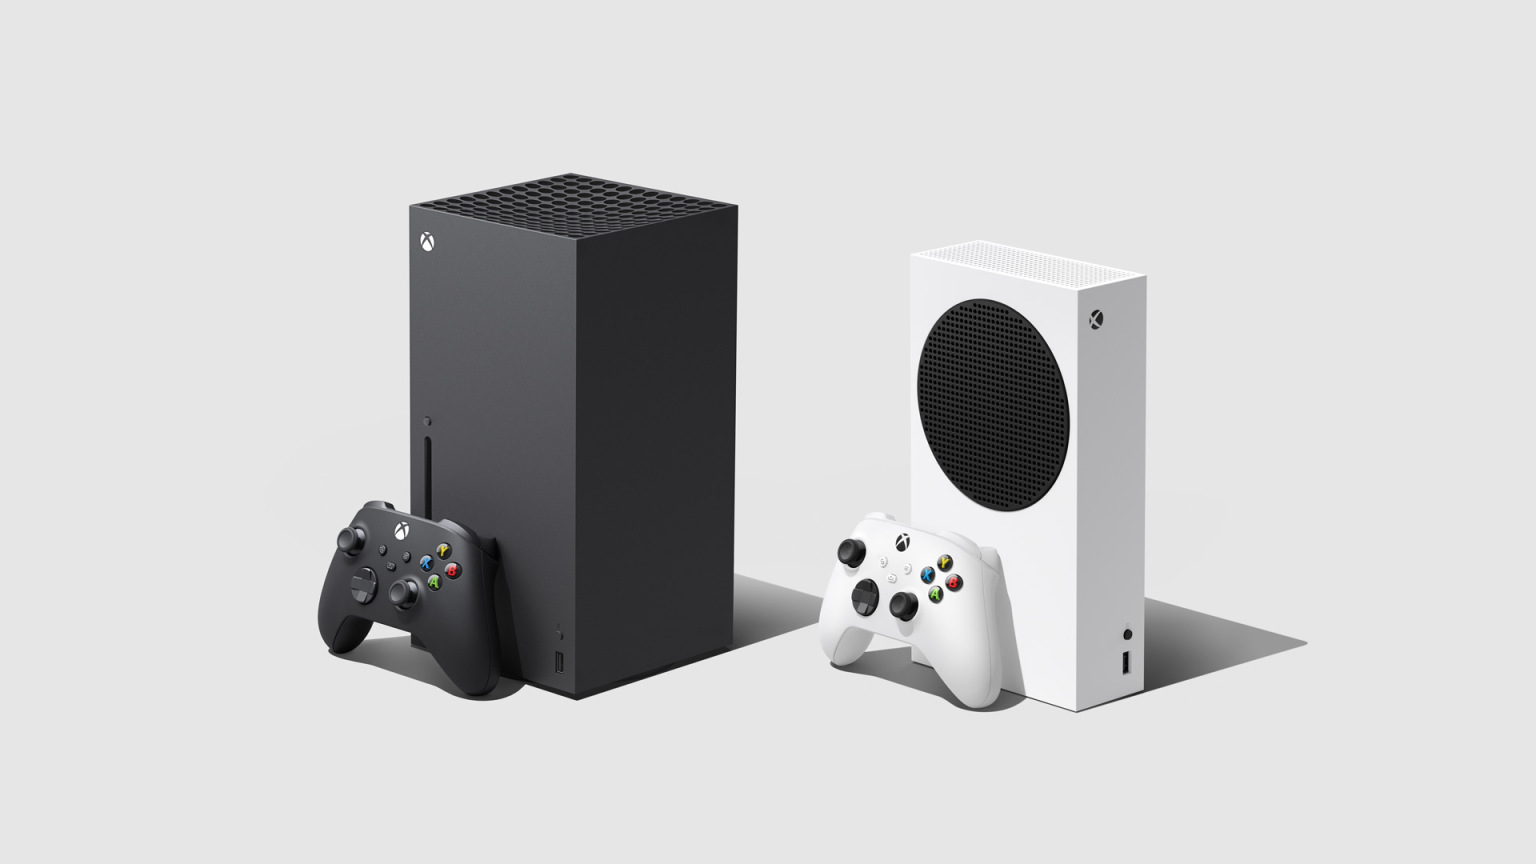 Xbox Series S will be available with 1TB storage in black for $349